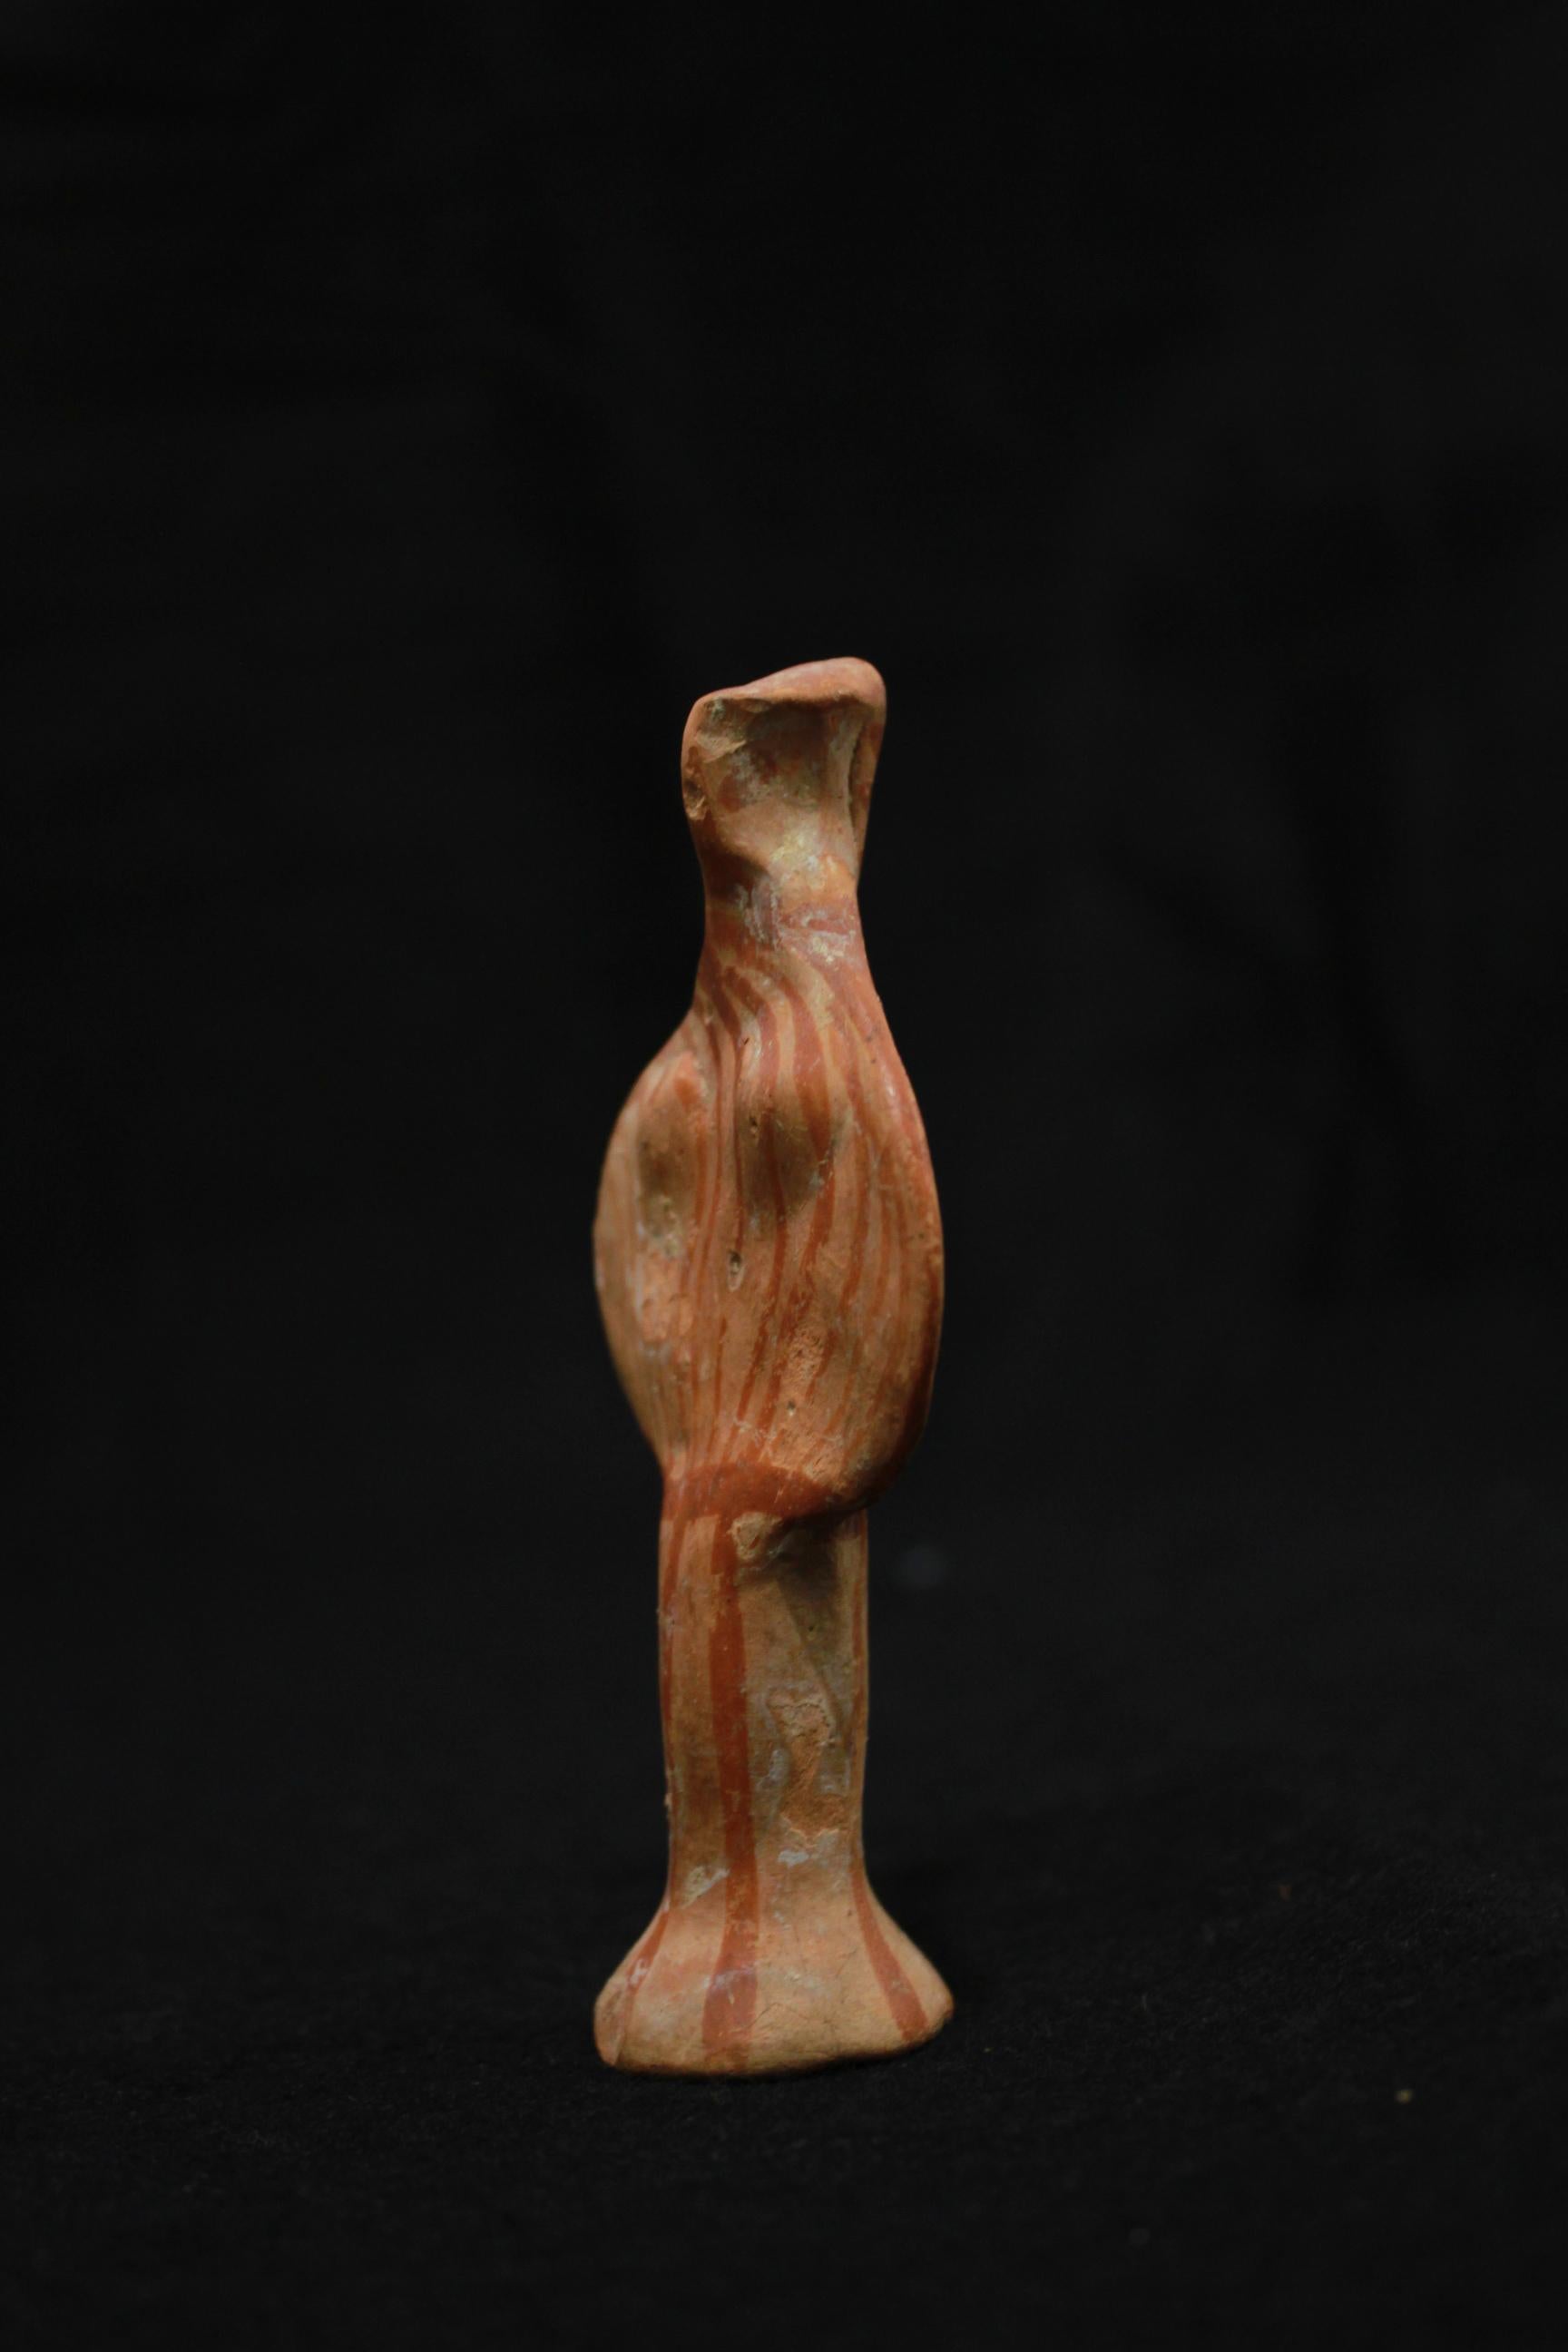 Feminine statuette with aviary traits and stylized forms. The pointed face was made by pinching the clay between two fingers. Her arms and her bust are disc shaped. Her breasts are slightly modeled, as is her hair, which is brought back in a long